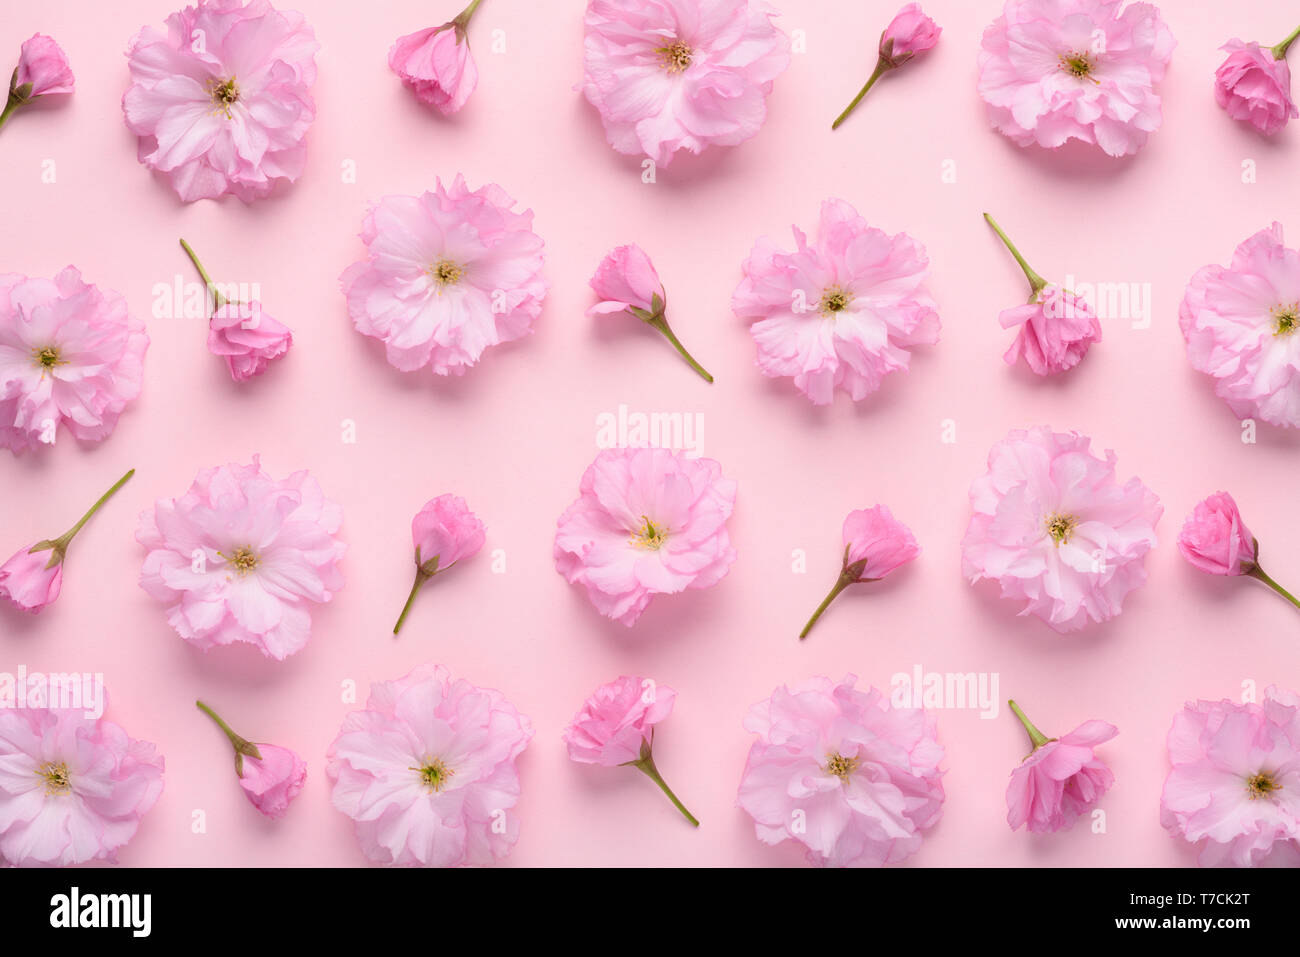 Floral pattern of sakura flowers and buds on pastel pink background. Soft cute flower pattern flat lay top view. Stock Photo